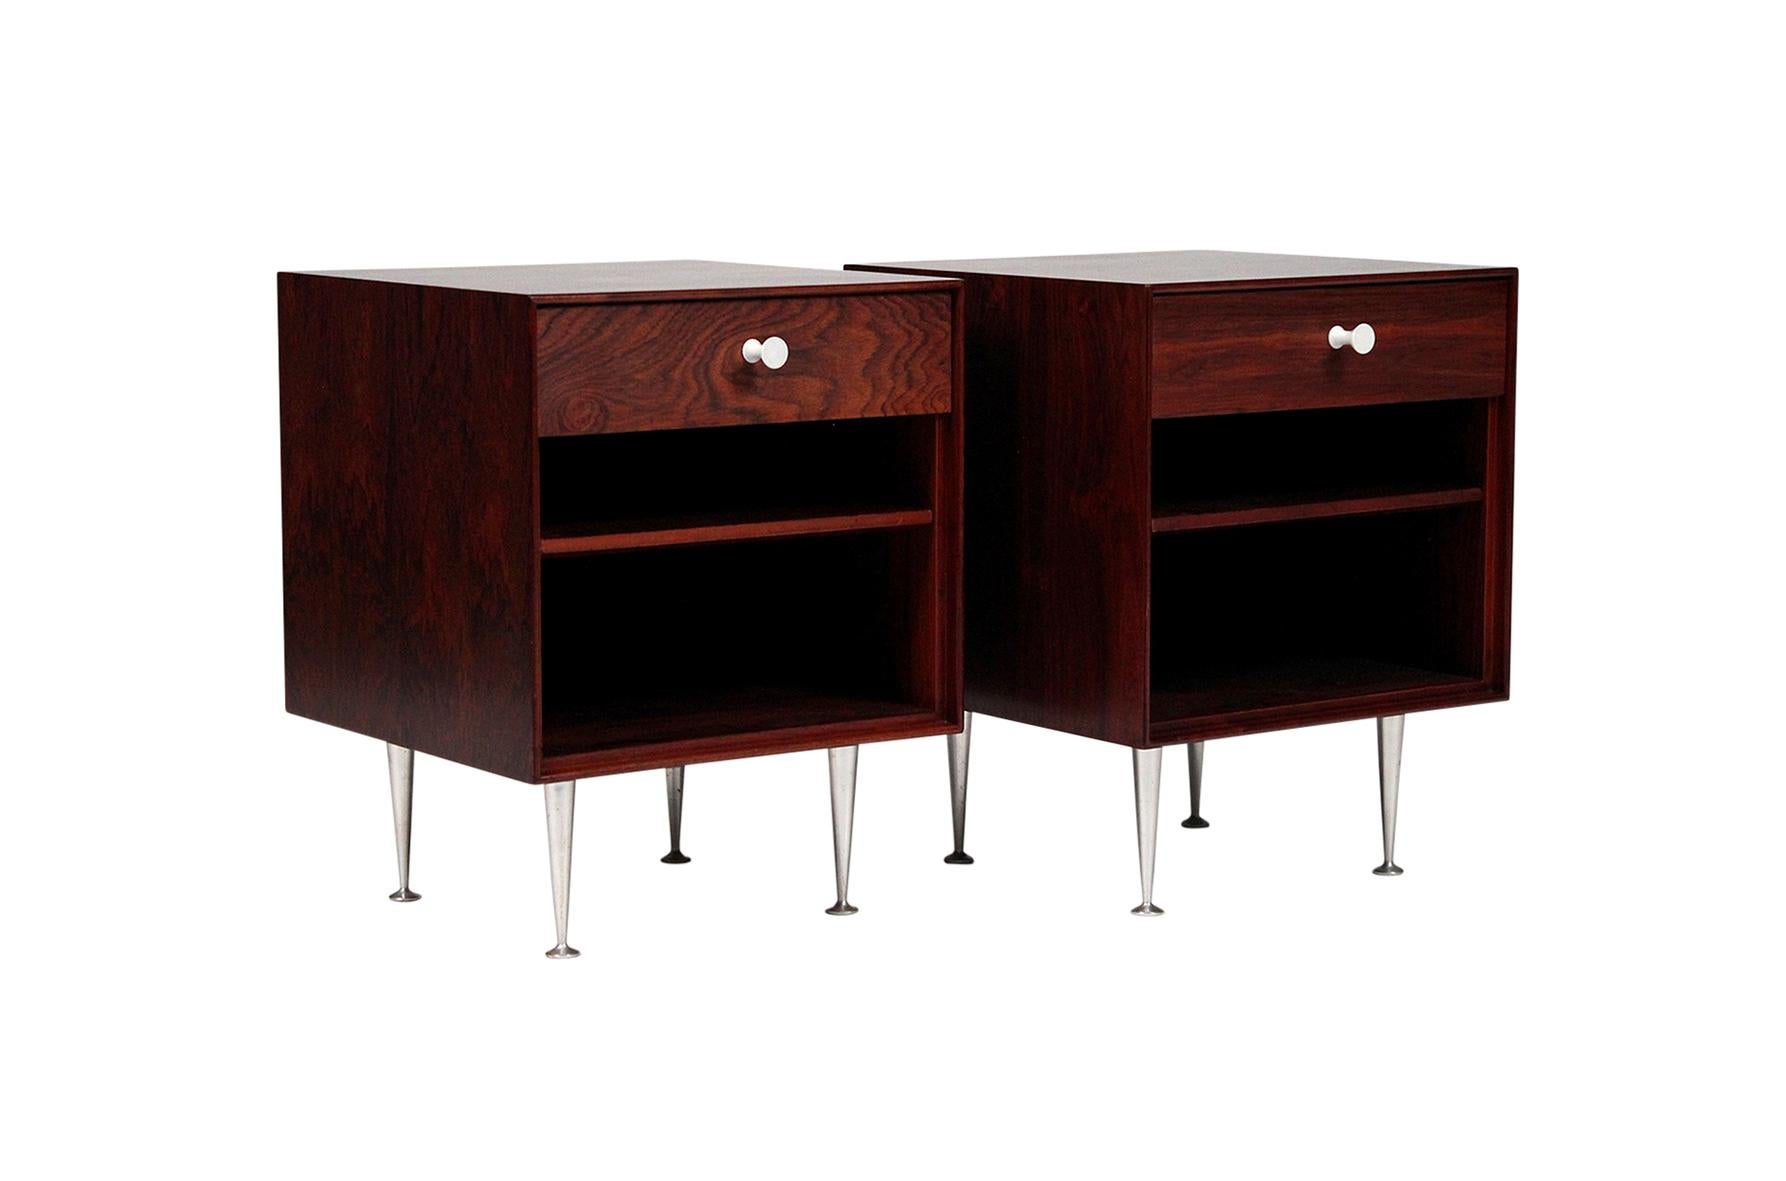 Pair of George Nelson for Herman Miller thin edge nightstands. Book matched rosewood veneers with porcelain pulls and tapered aluminum legs. Rare examples of the iconic series. White metal Herman Miller label in drawer interior.